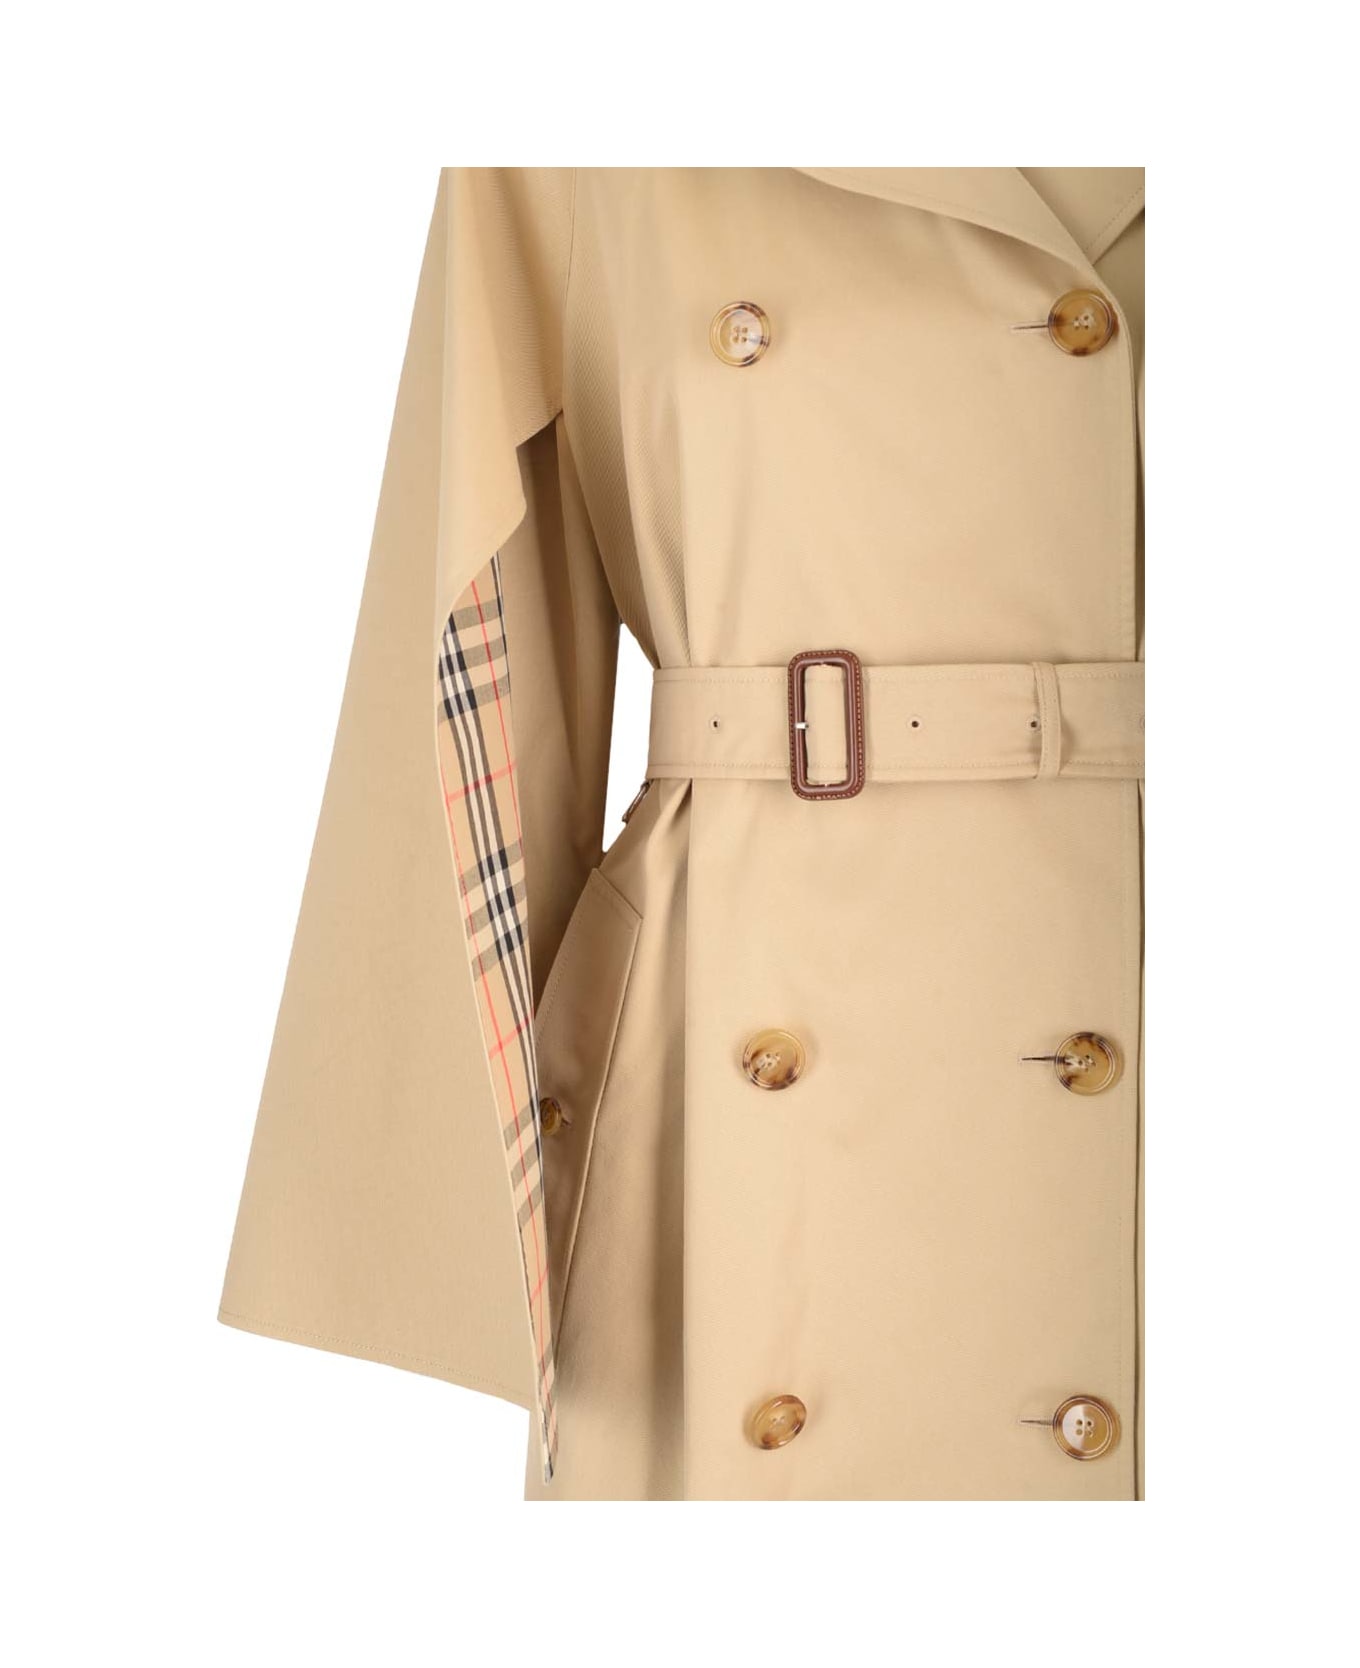 Burberry Trench Coat With Cape Sleeves - Beige